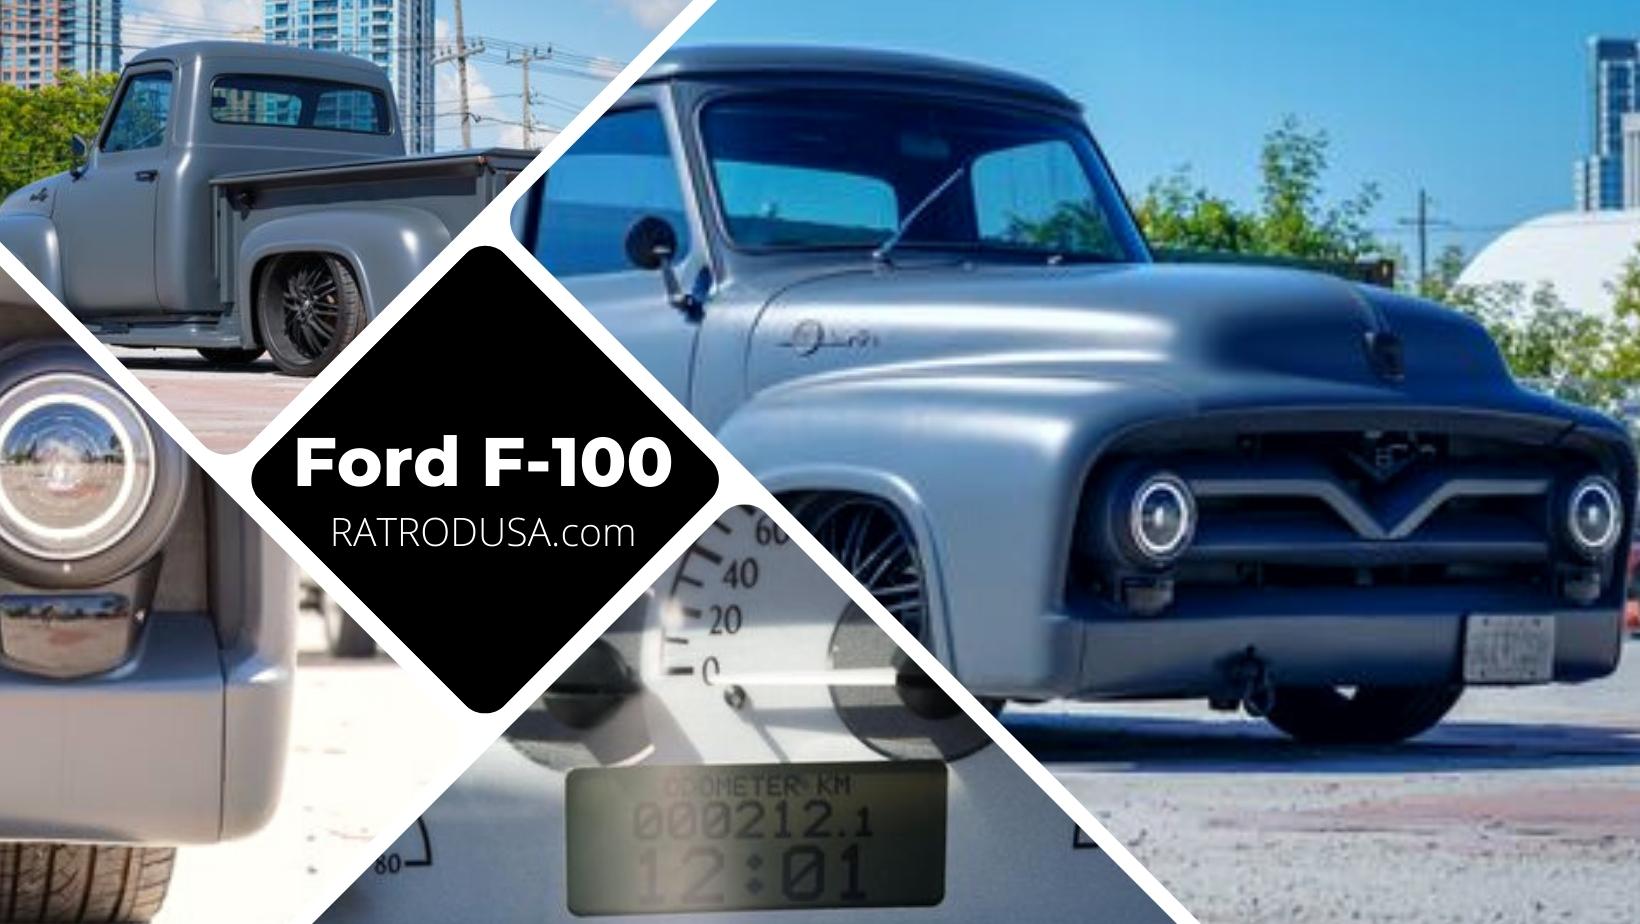 1955 Ford F100 Restomod With AC and a Fuel-Injected 302